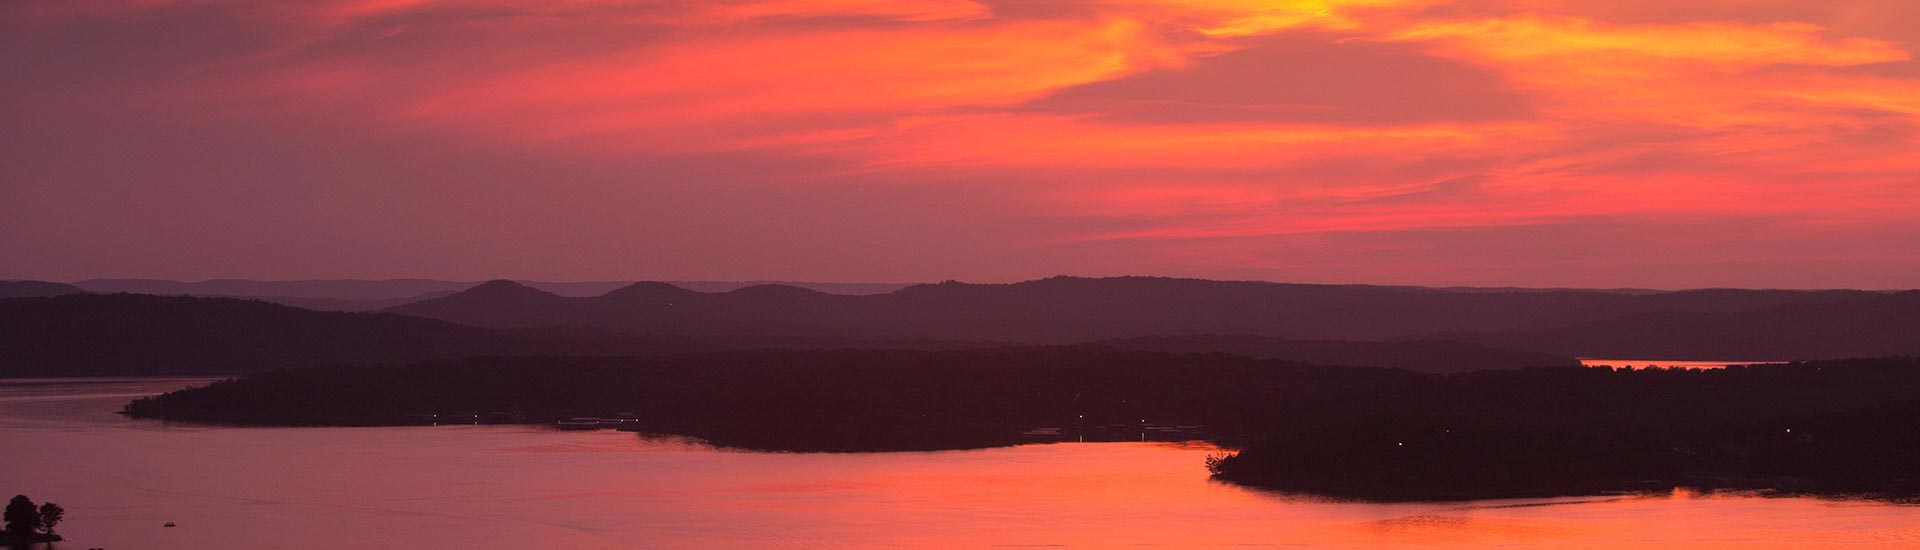 Header image of a fiery sunset turning the waters of Table Rock Lake crimson and casting a silhouette of its shoreline.